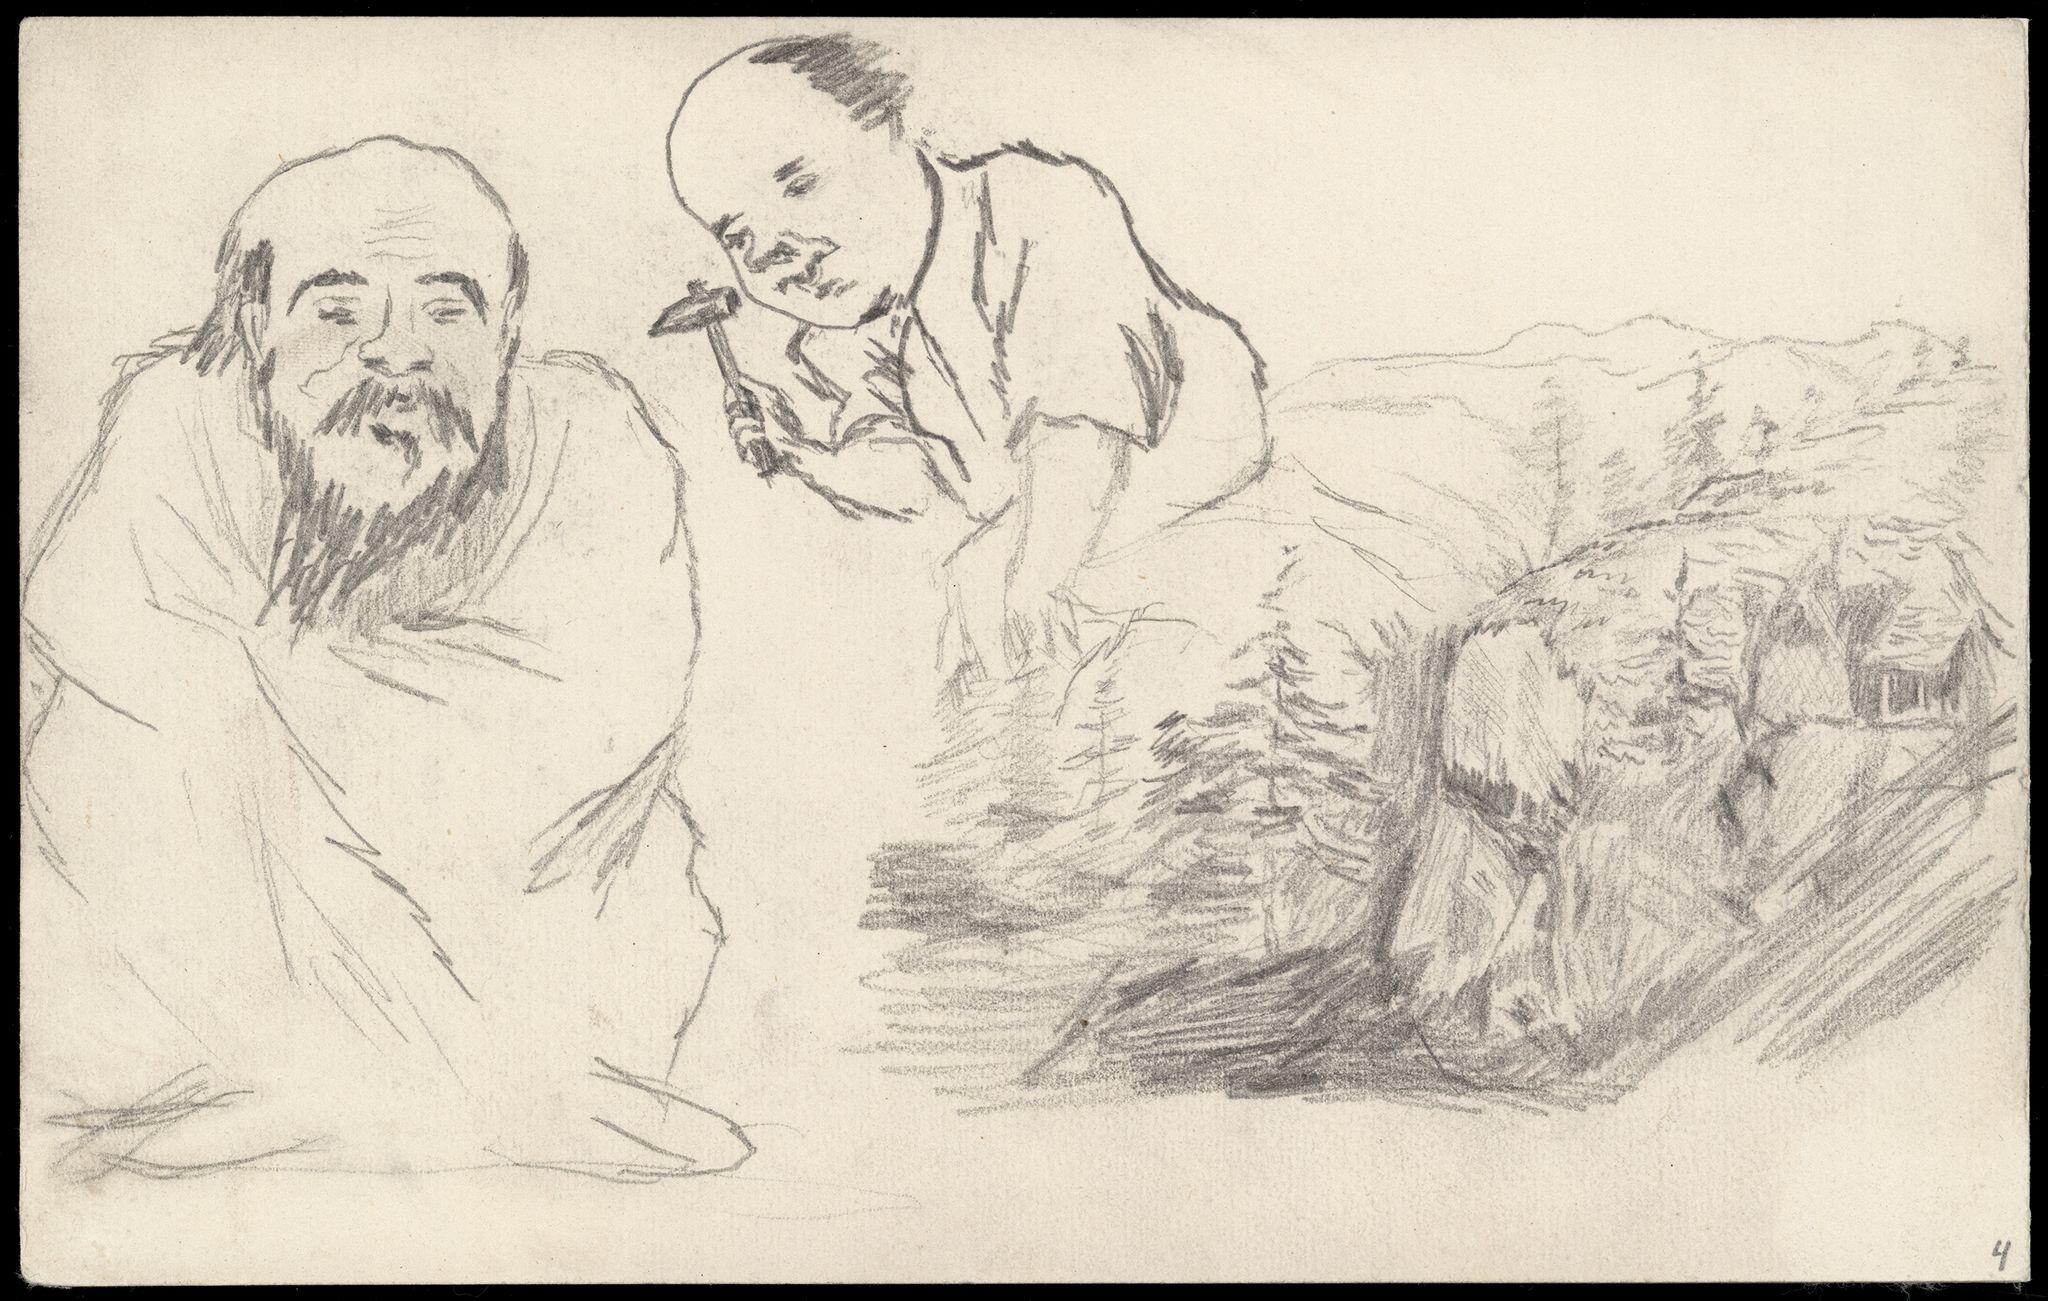 Image for: Drawings of Men and Mountains